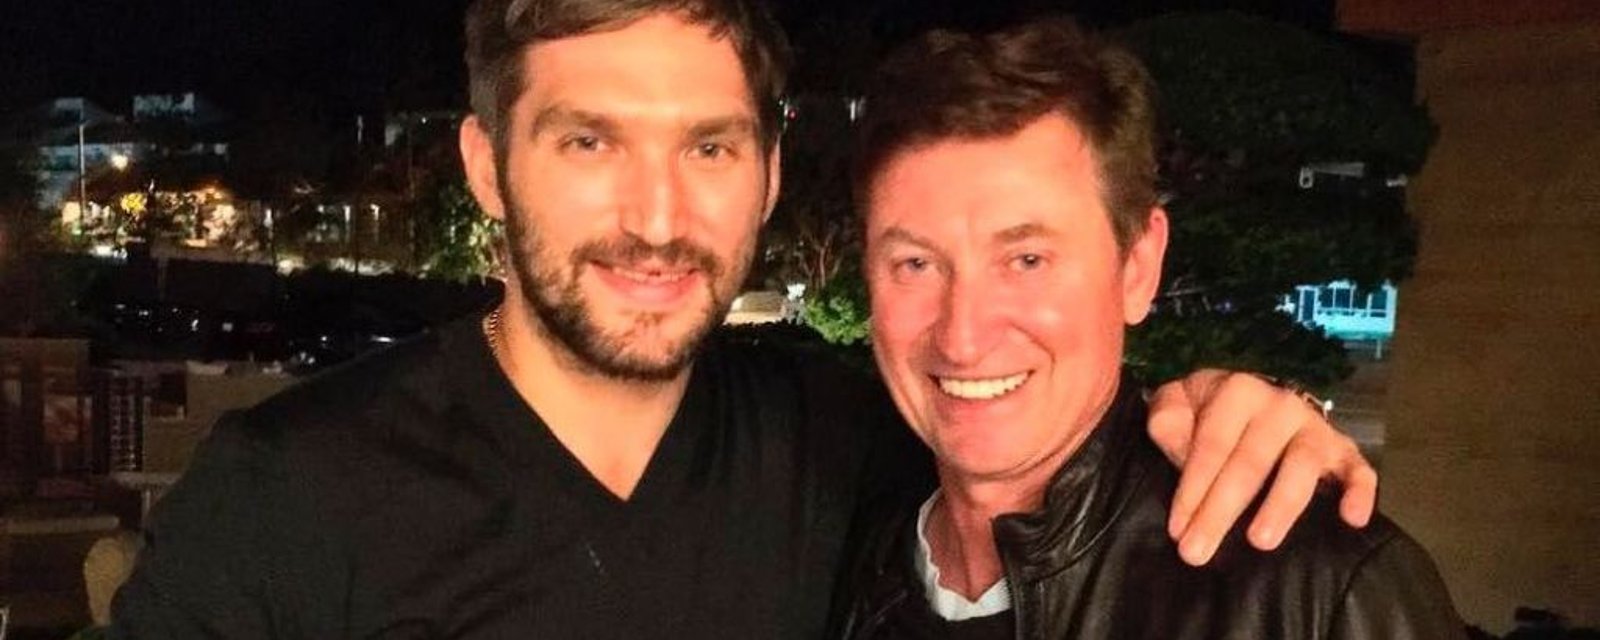 Gretzky and Ovechkin to face off in interview 